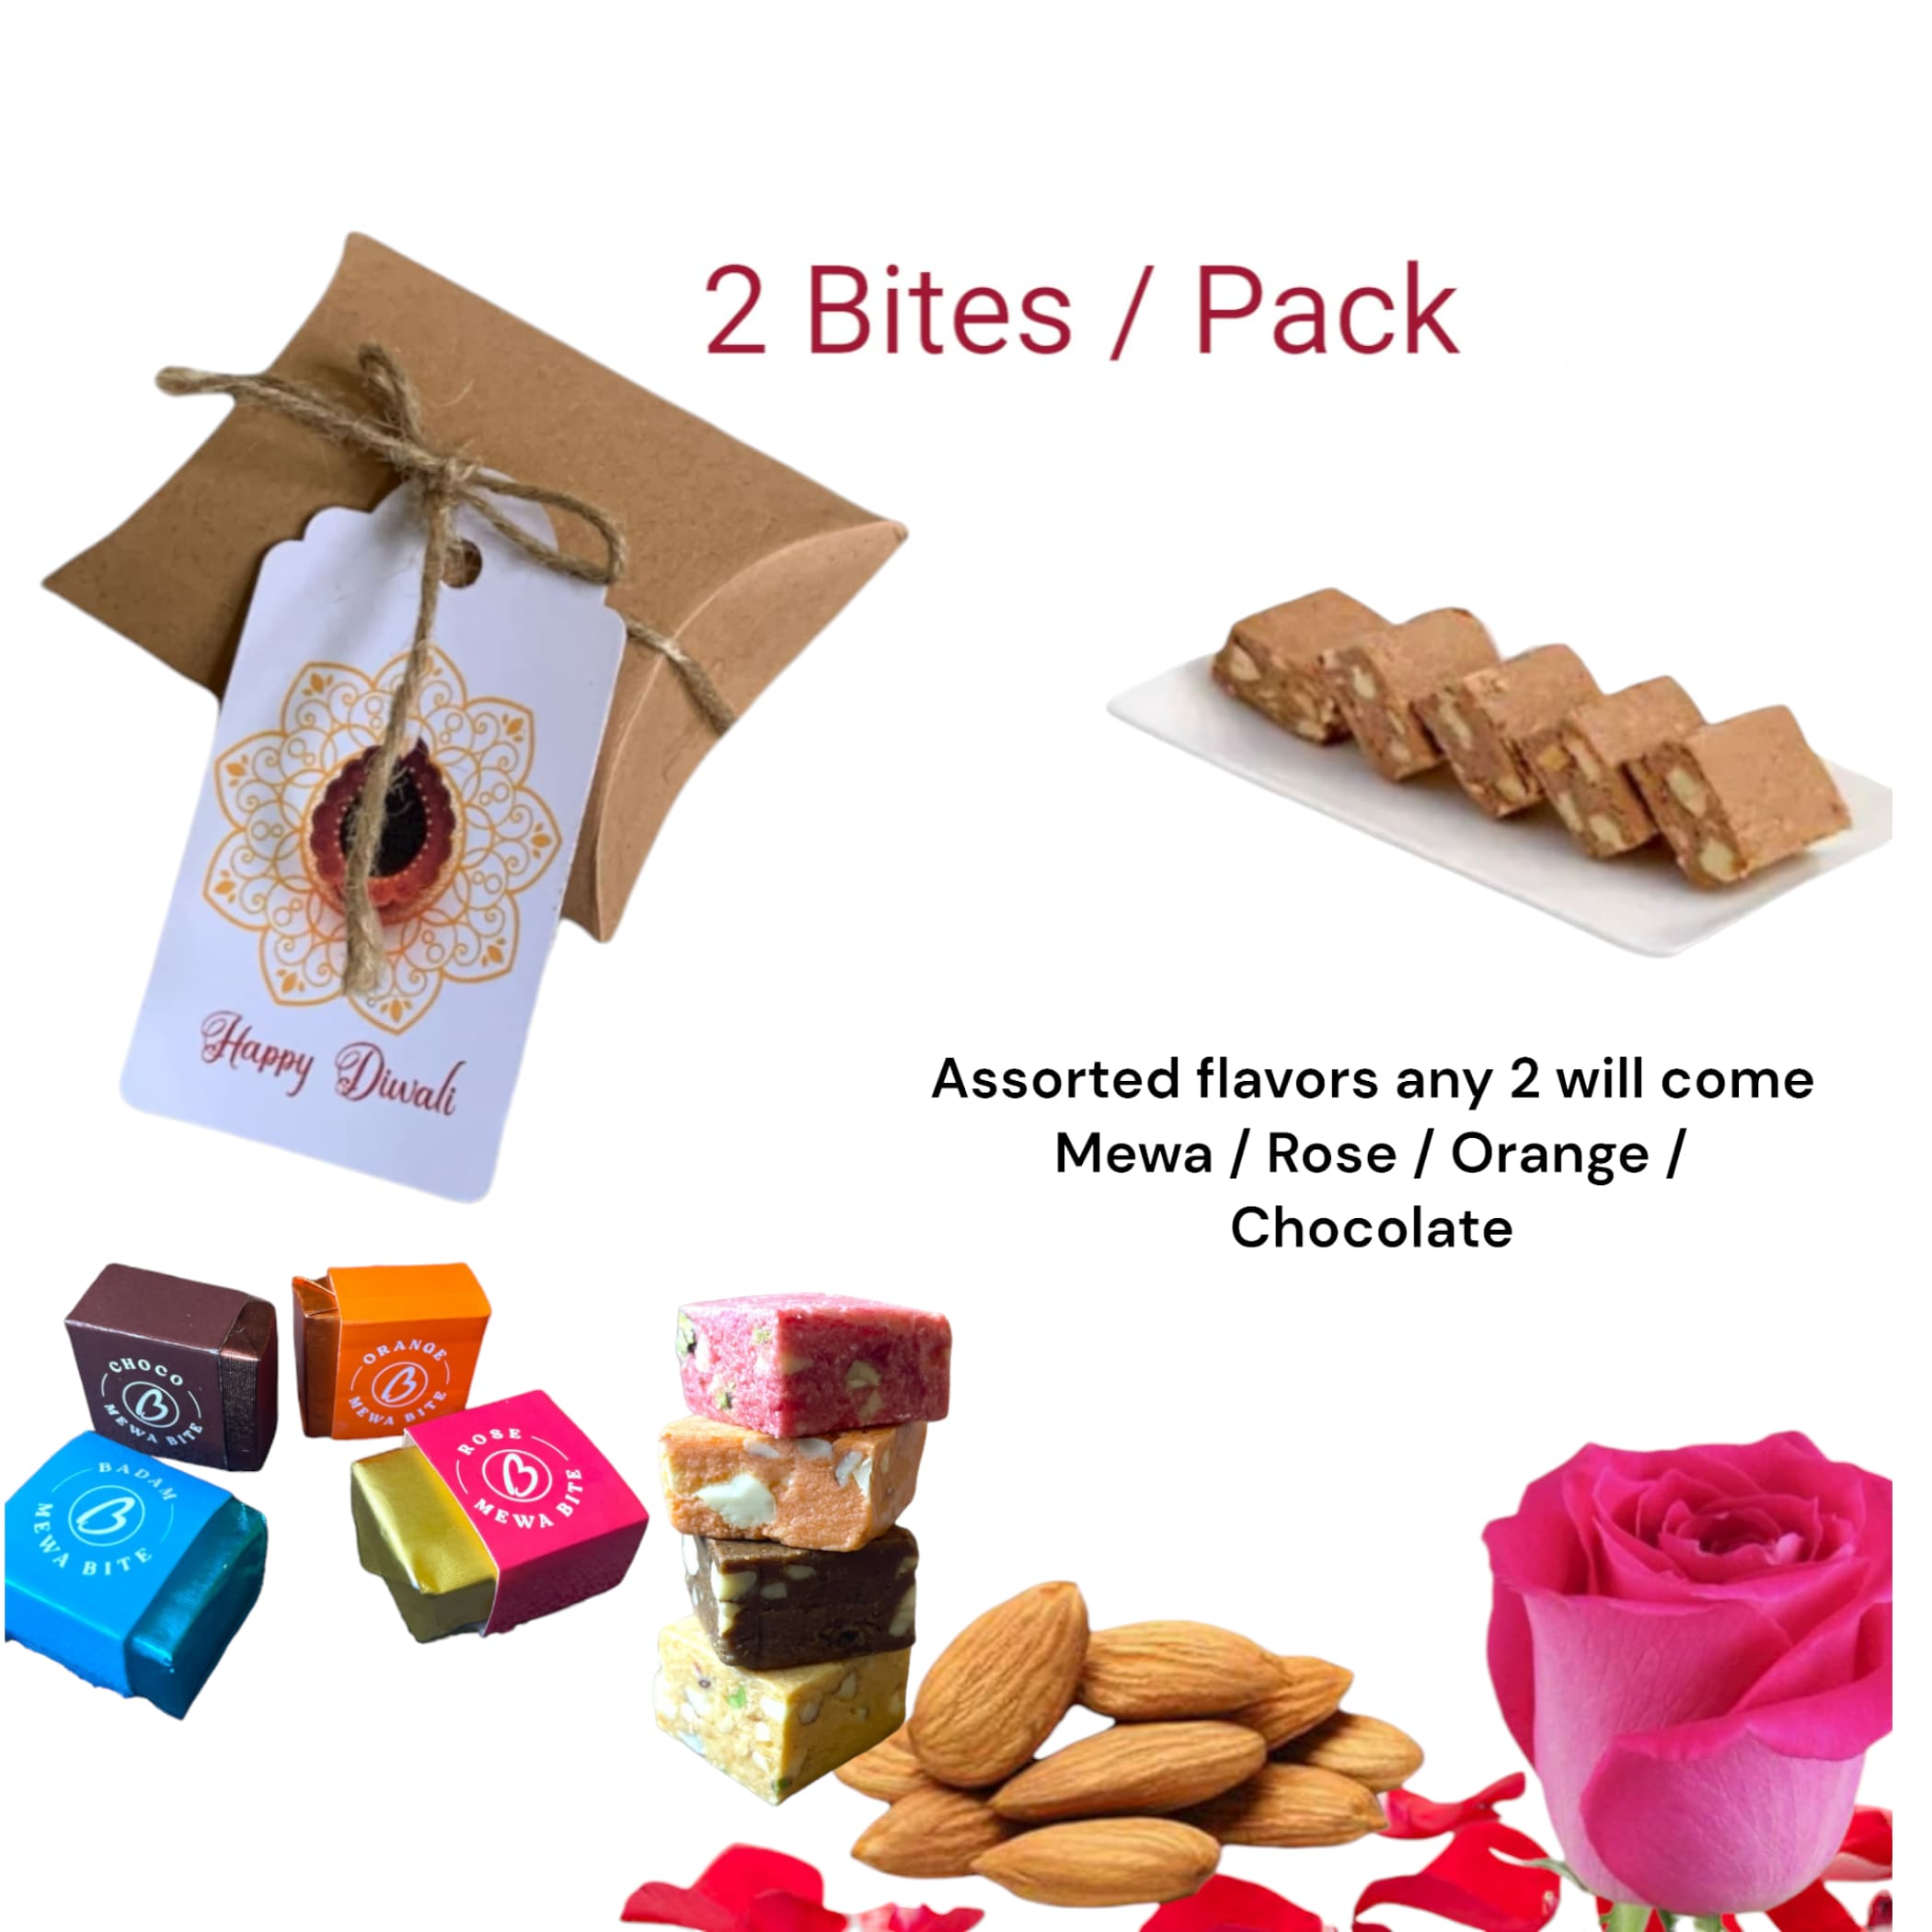 Personalized diwali gifts hamper shubh labh indian sweets